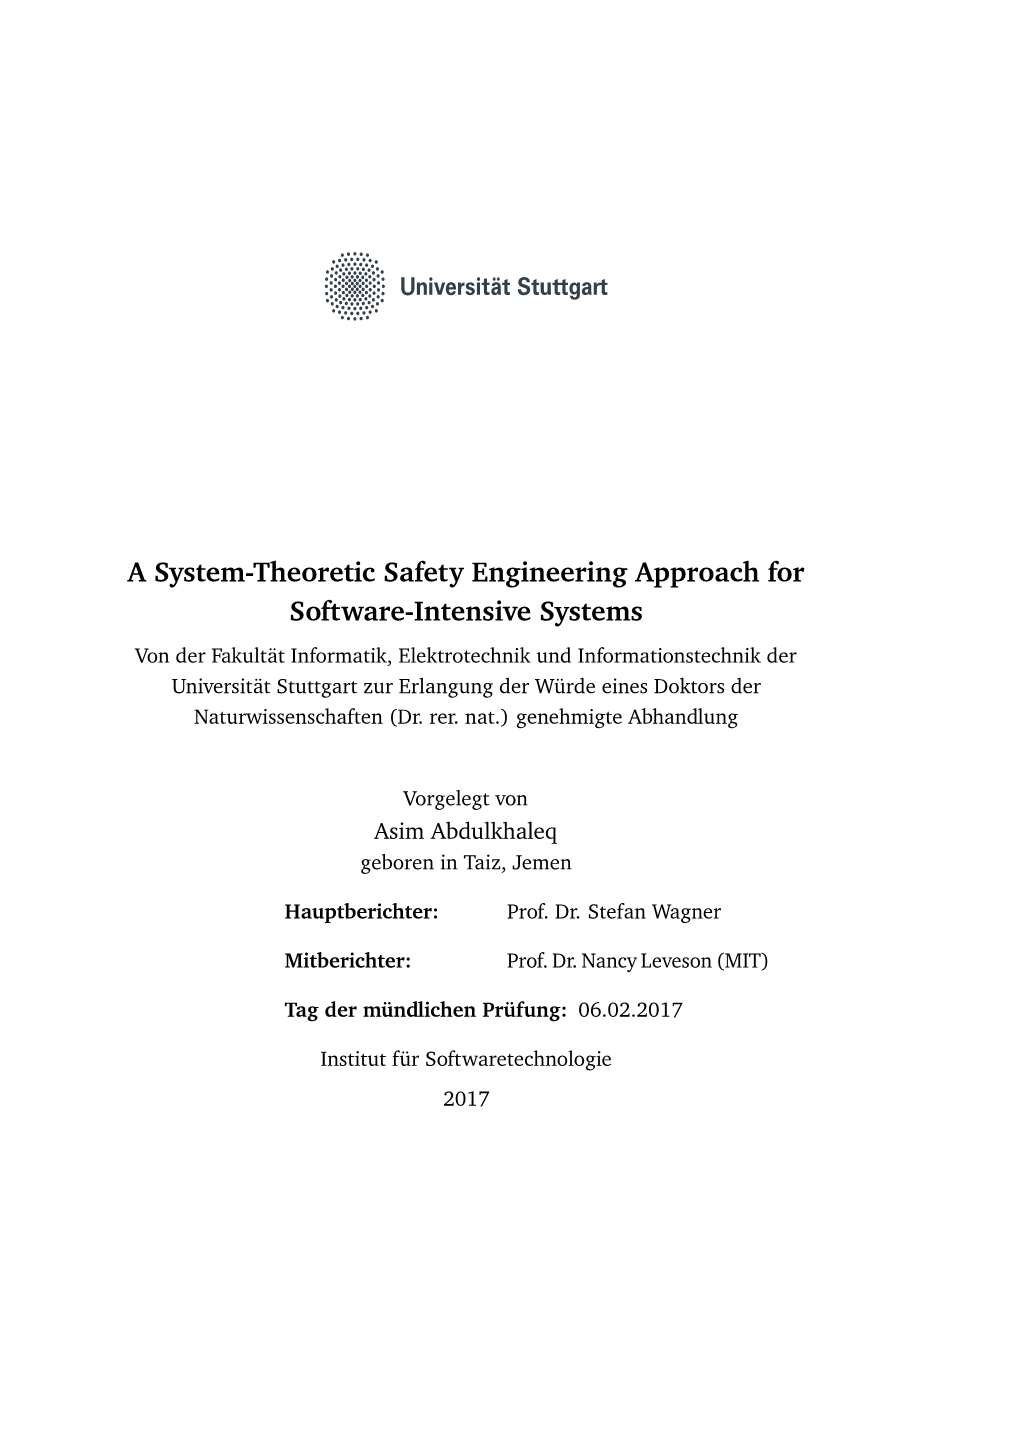 A System-Theoretic Safety Engineering Approach for Software